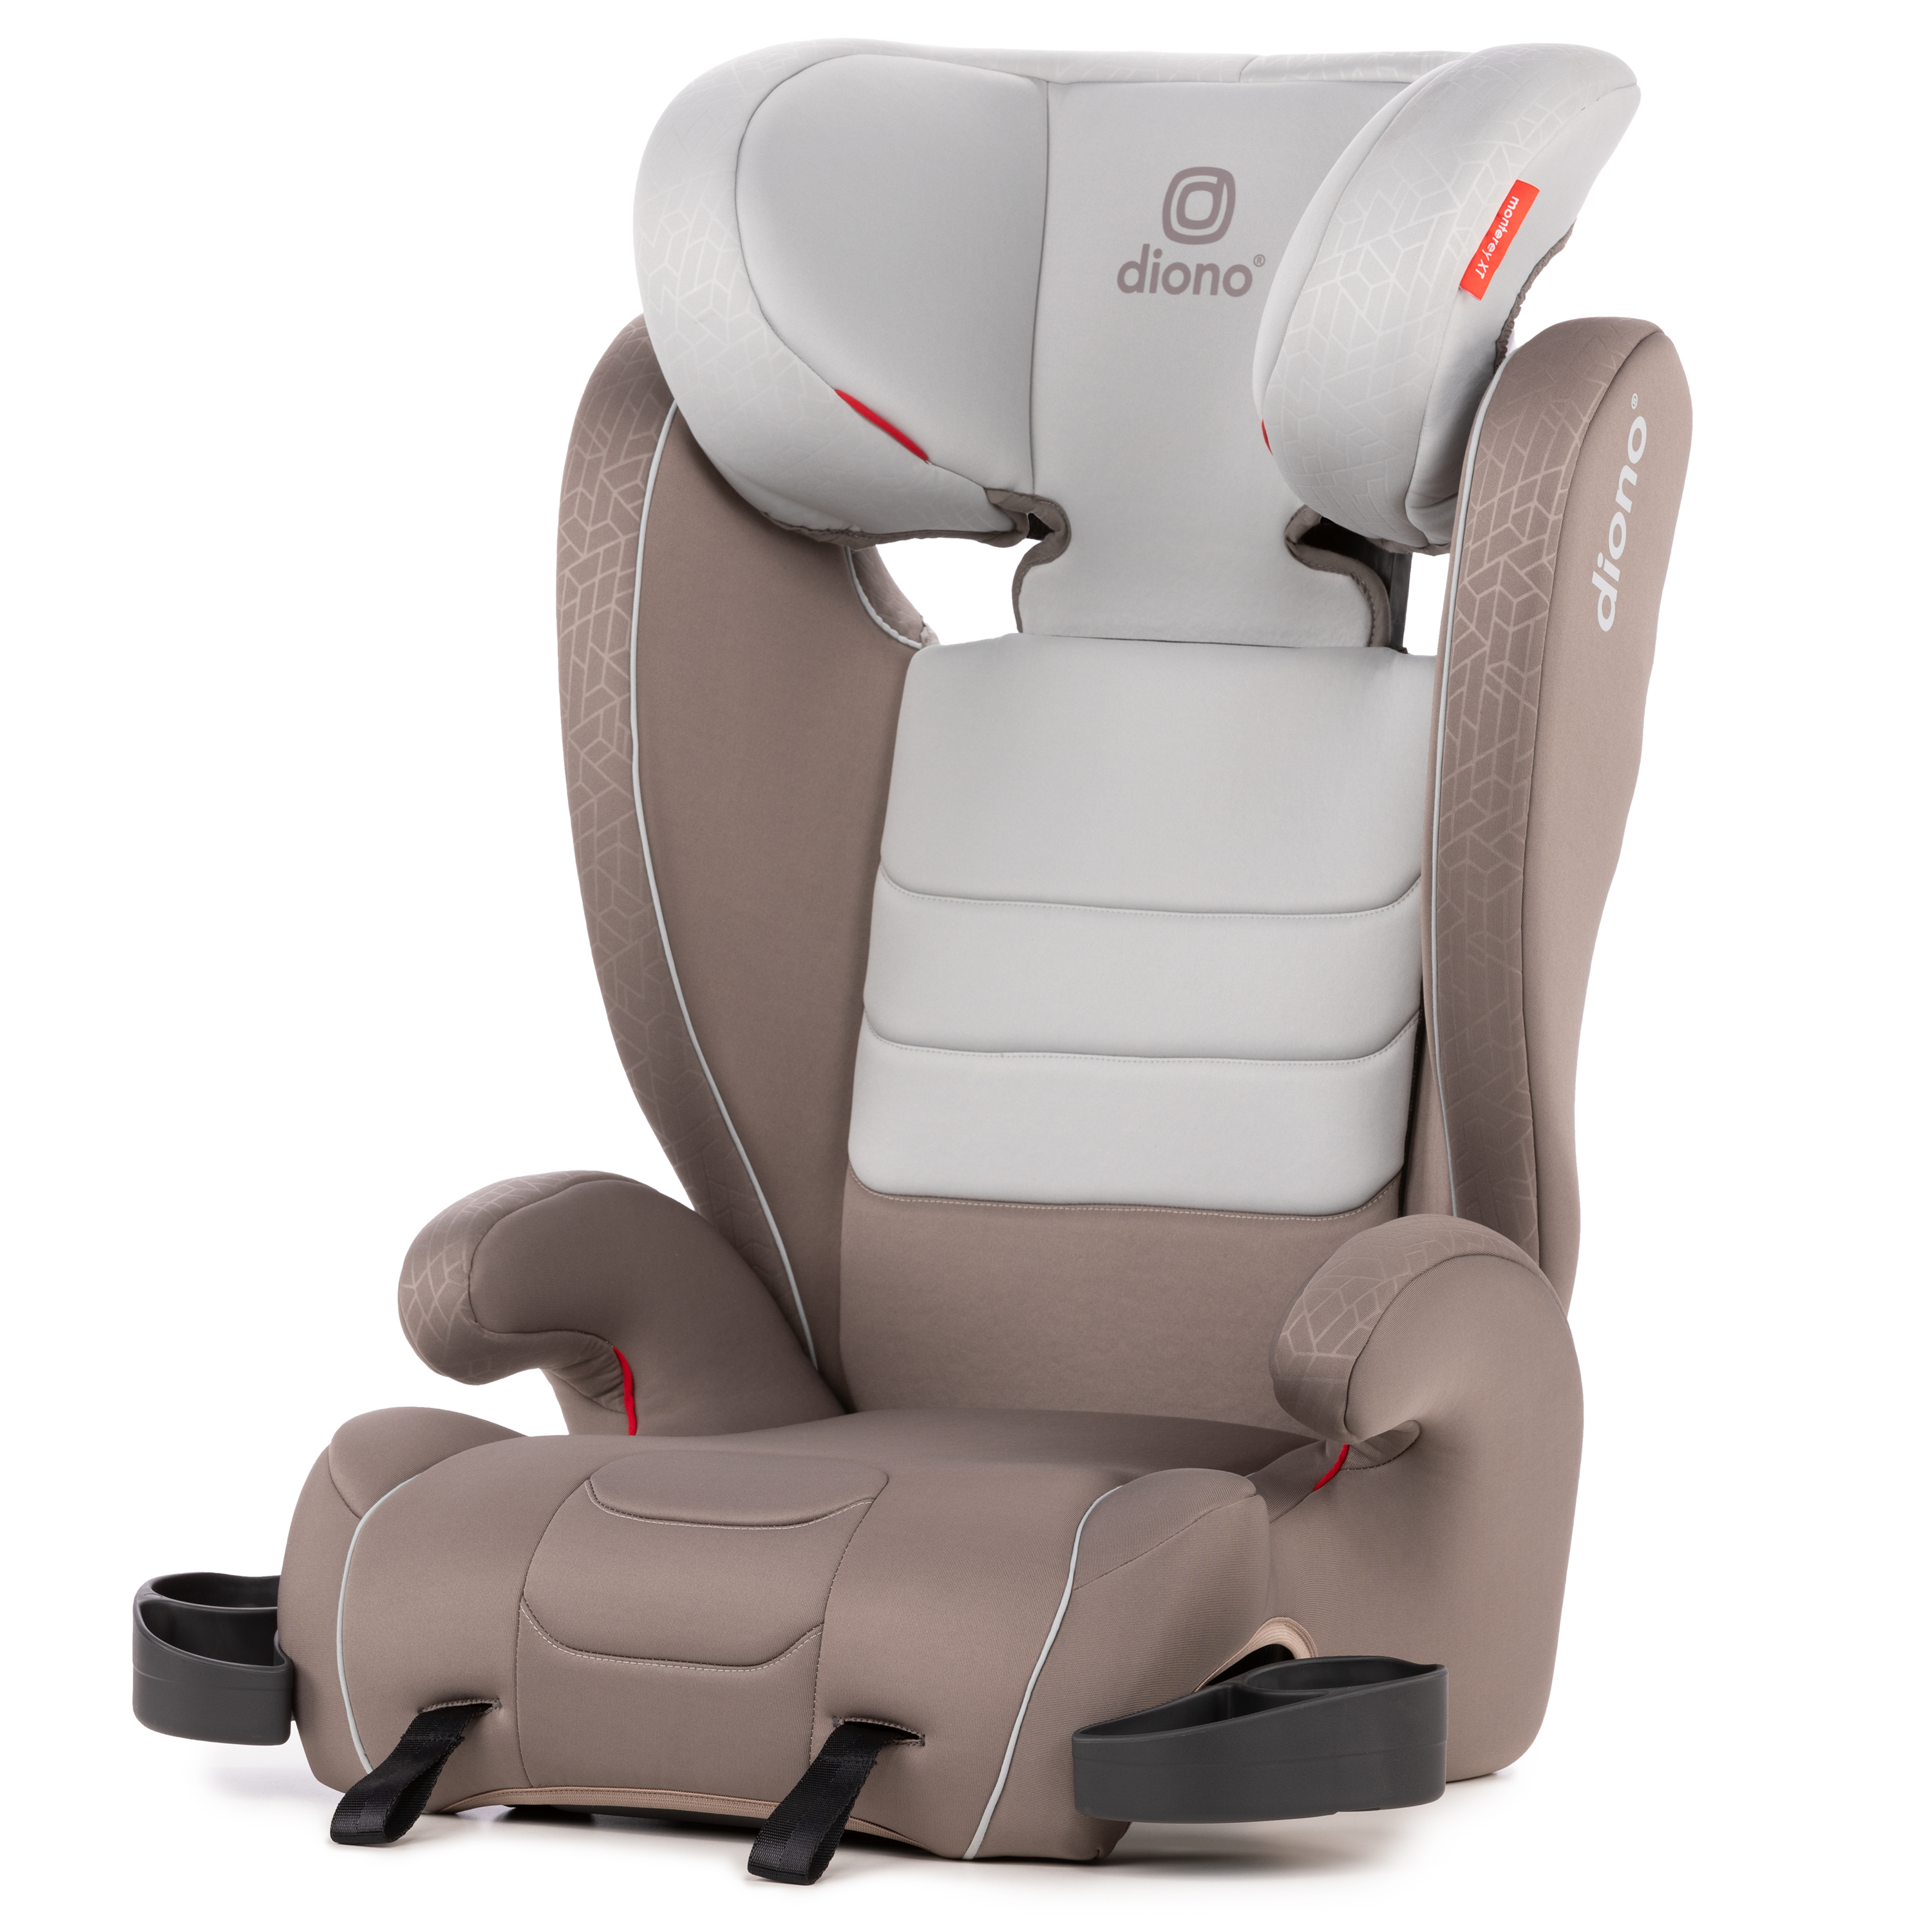 Diono Monterey XT Latch 2-in-1 Expandable Booster Car Seat, Gray Oyster - image 1 of 13